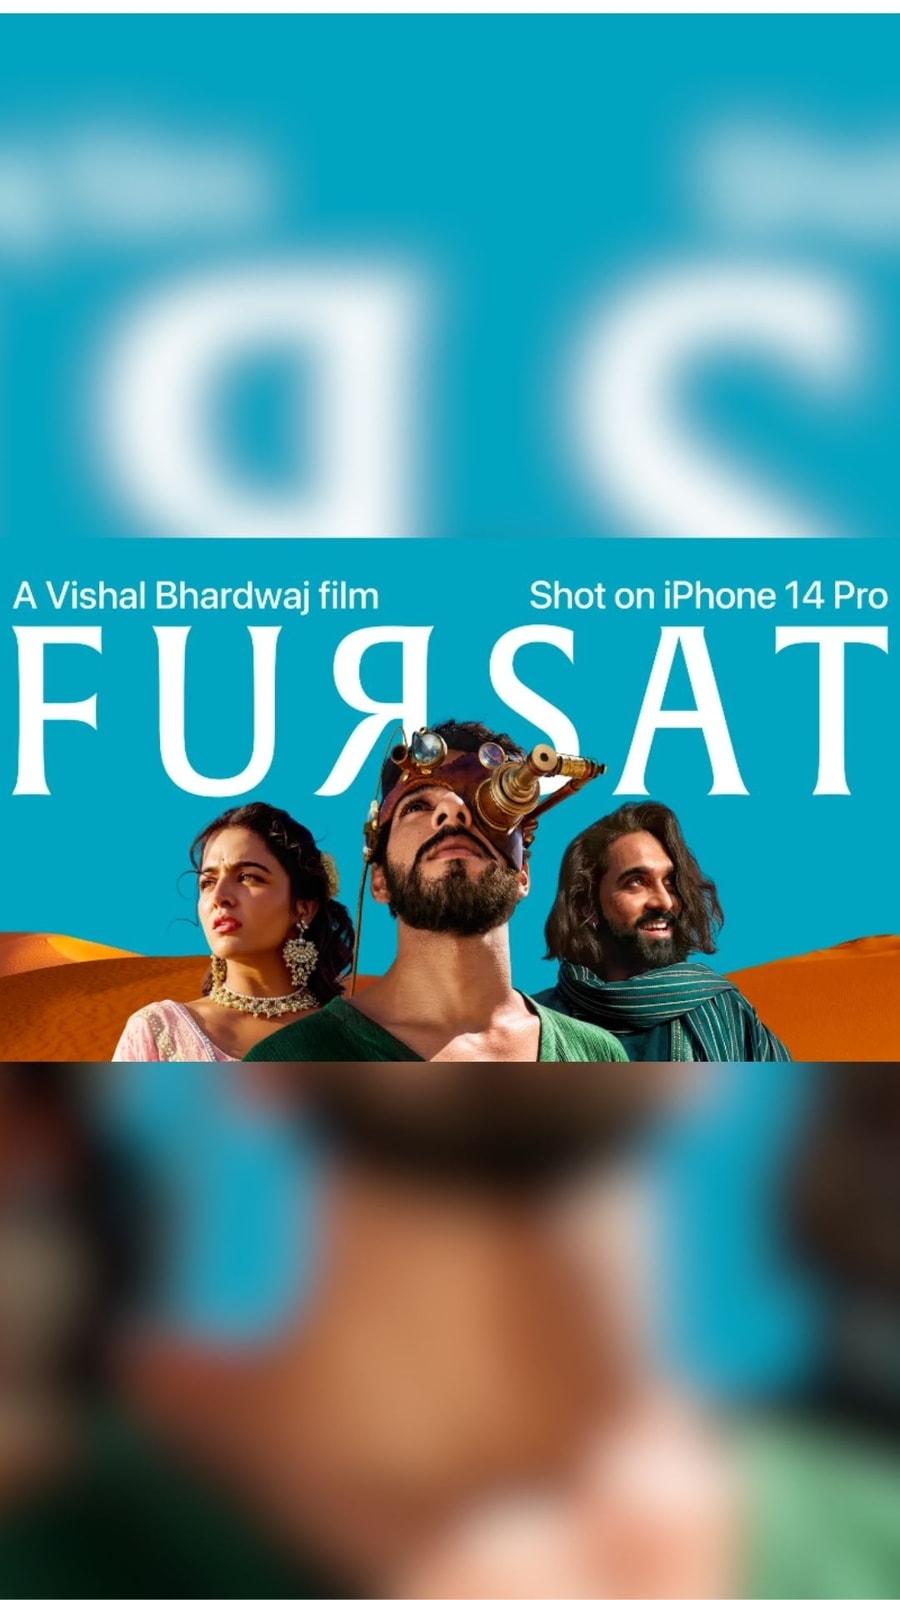 Fursat Is a Short Film, Shot Entirely on the iPhone 14 Pro